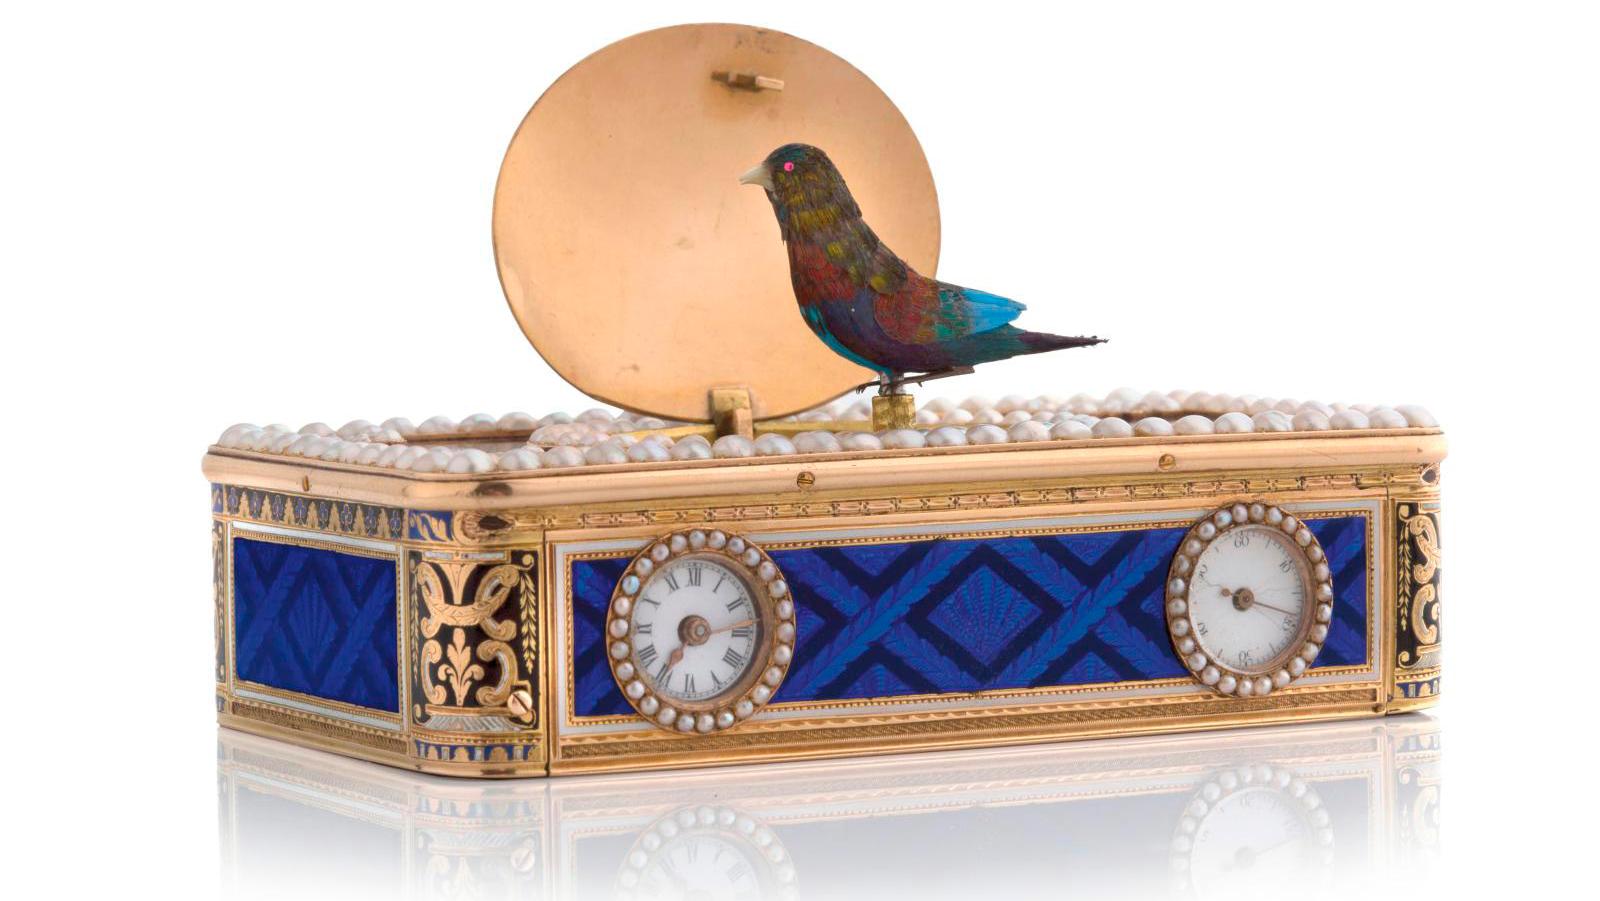 How do antique singing bird music boxes work?